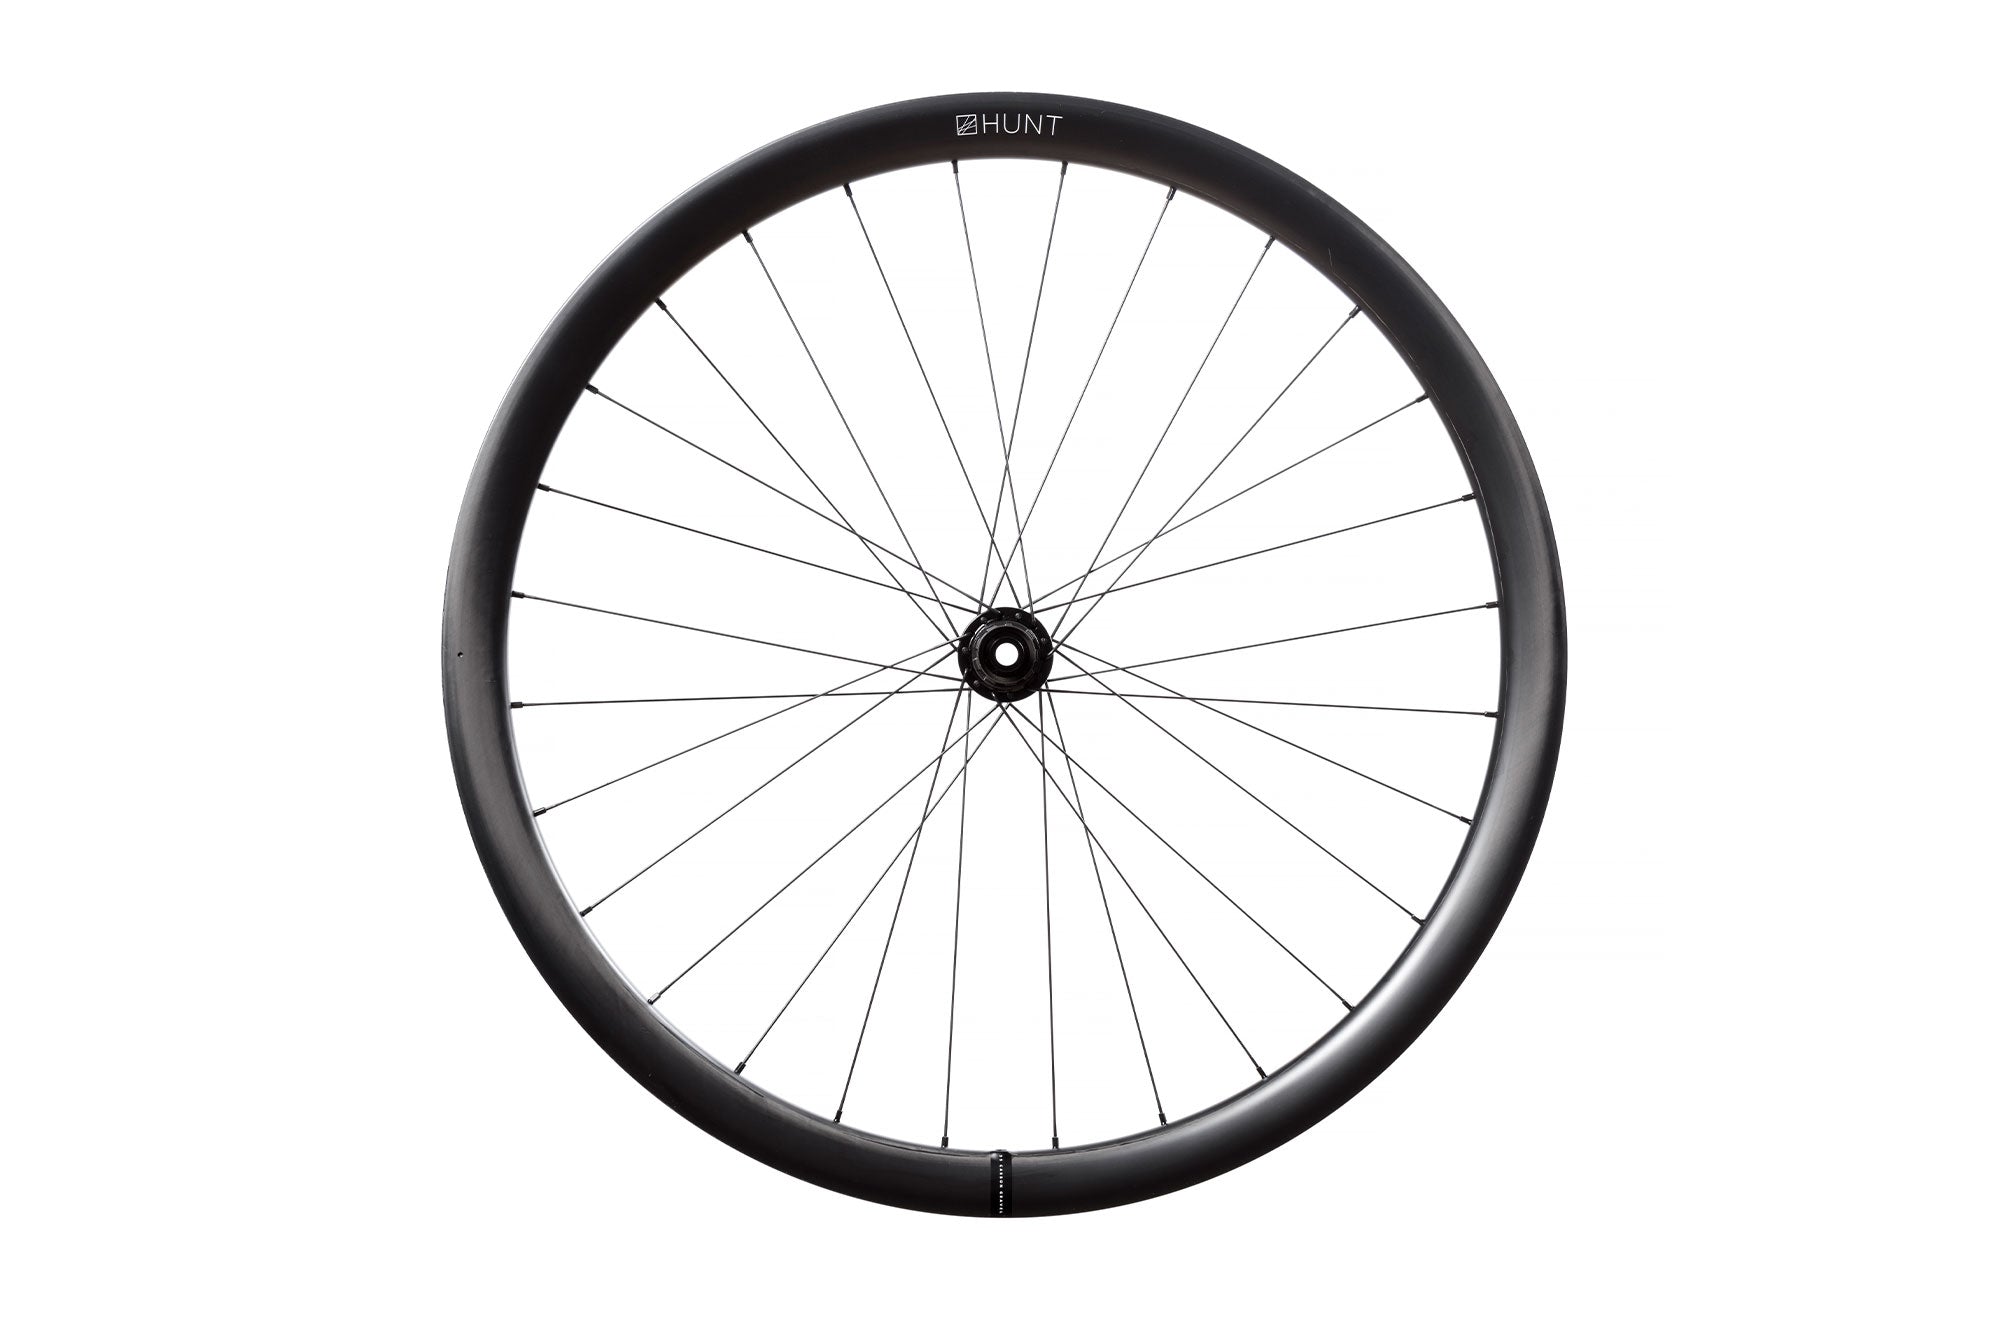 <h1>Spokes</h1><i>Handbuilt with top-of-the-range, reinforced Pillar PSR triple butted J-bend spokes for durability. Triple butted spokes reduce weight and provide greater elasticity to maintain optimal tension and resist fatigue, with an increased 2.2mm diameter at the spoke head, providing more material in this high stress area. </i>